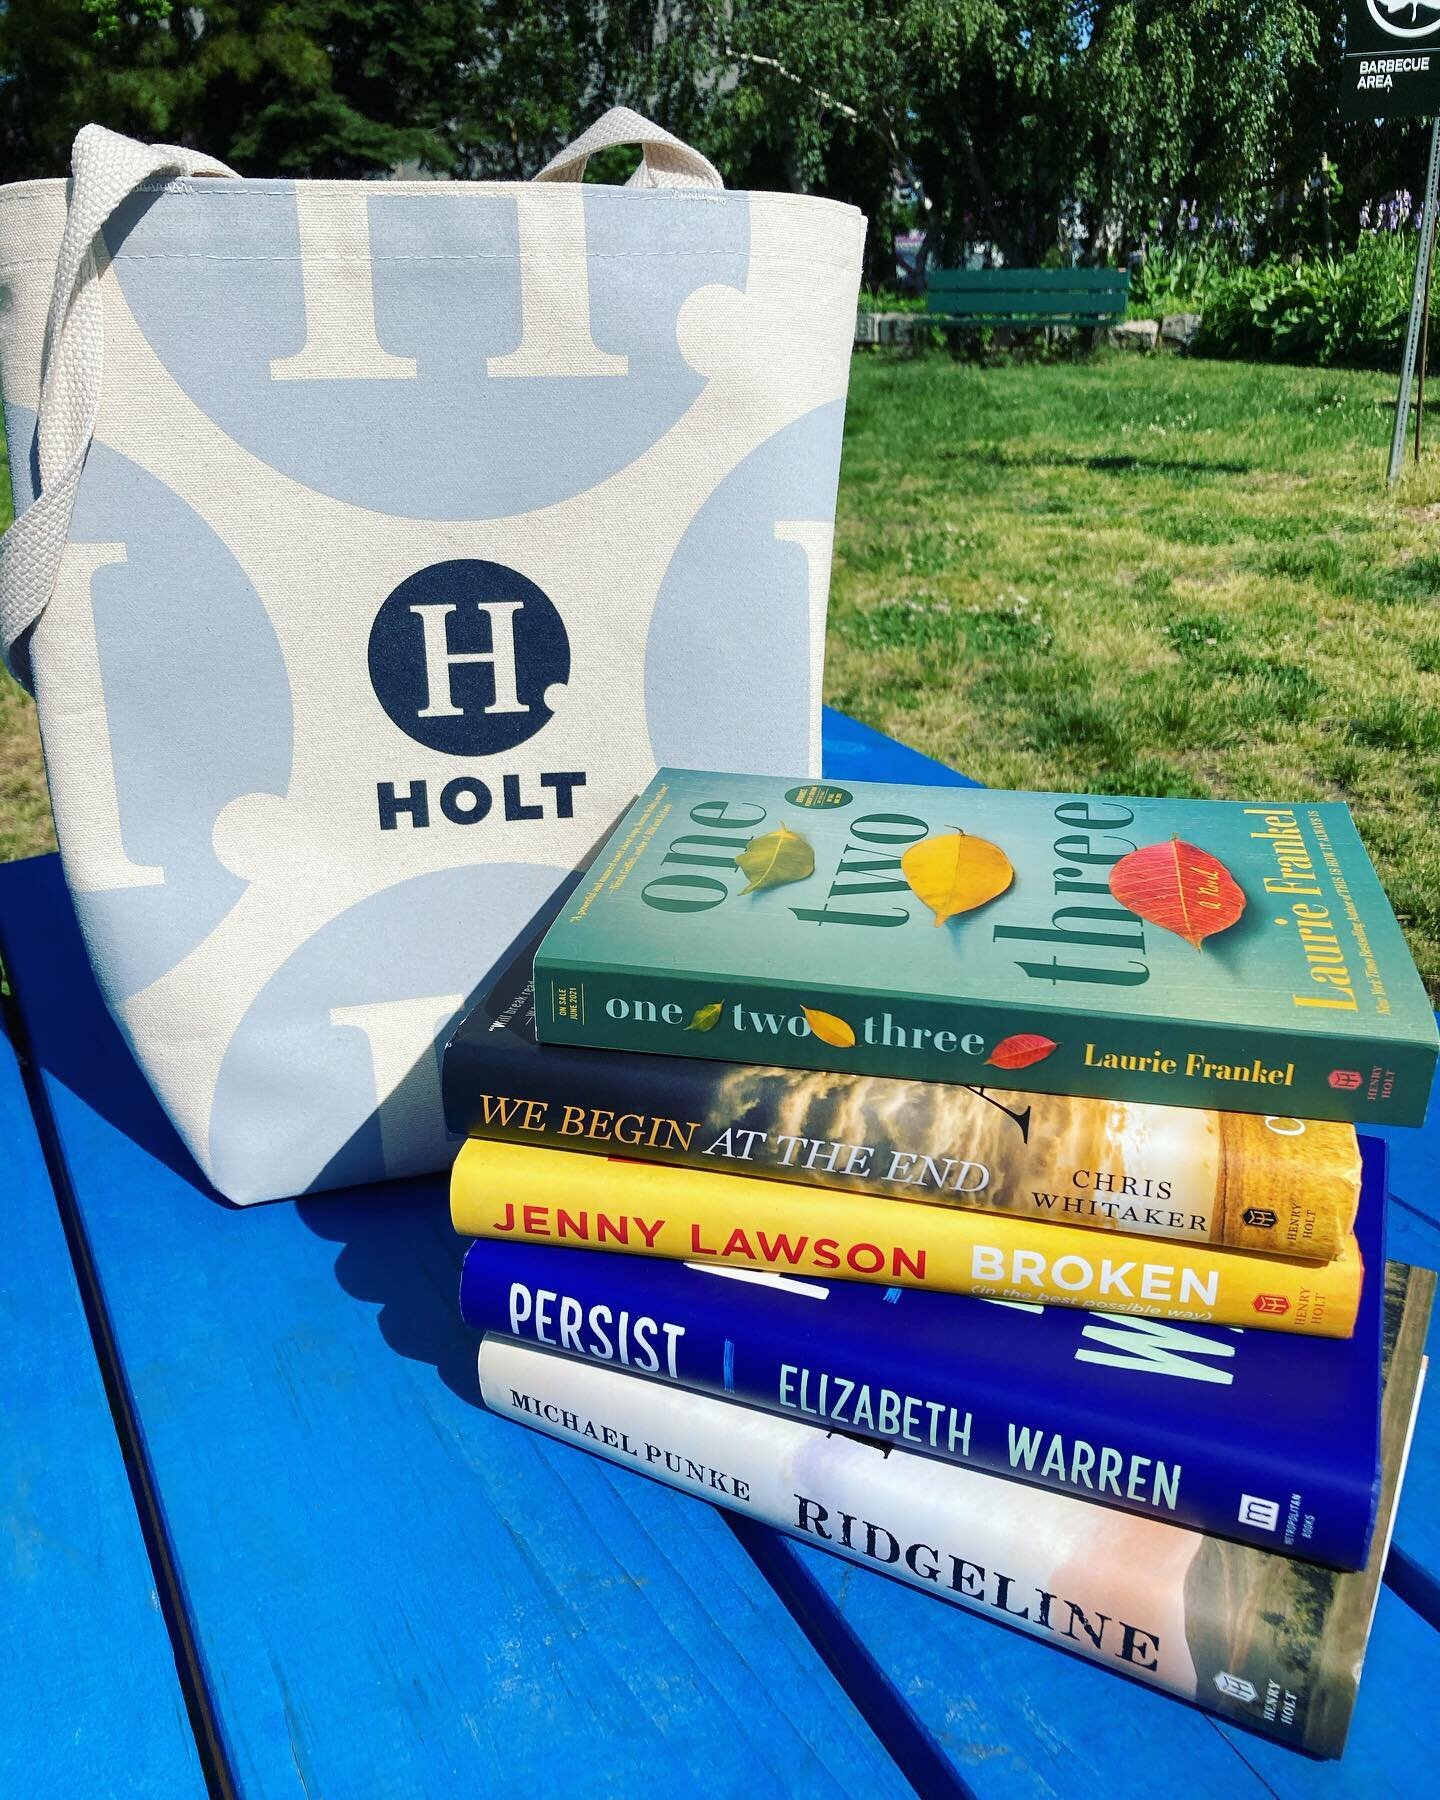 📚What&rsquo;s in your tote bag this weekend? Comment below with emojis 🕶🩴